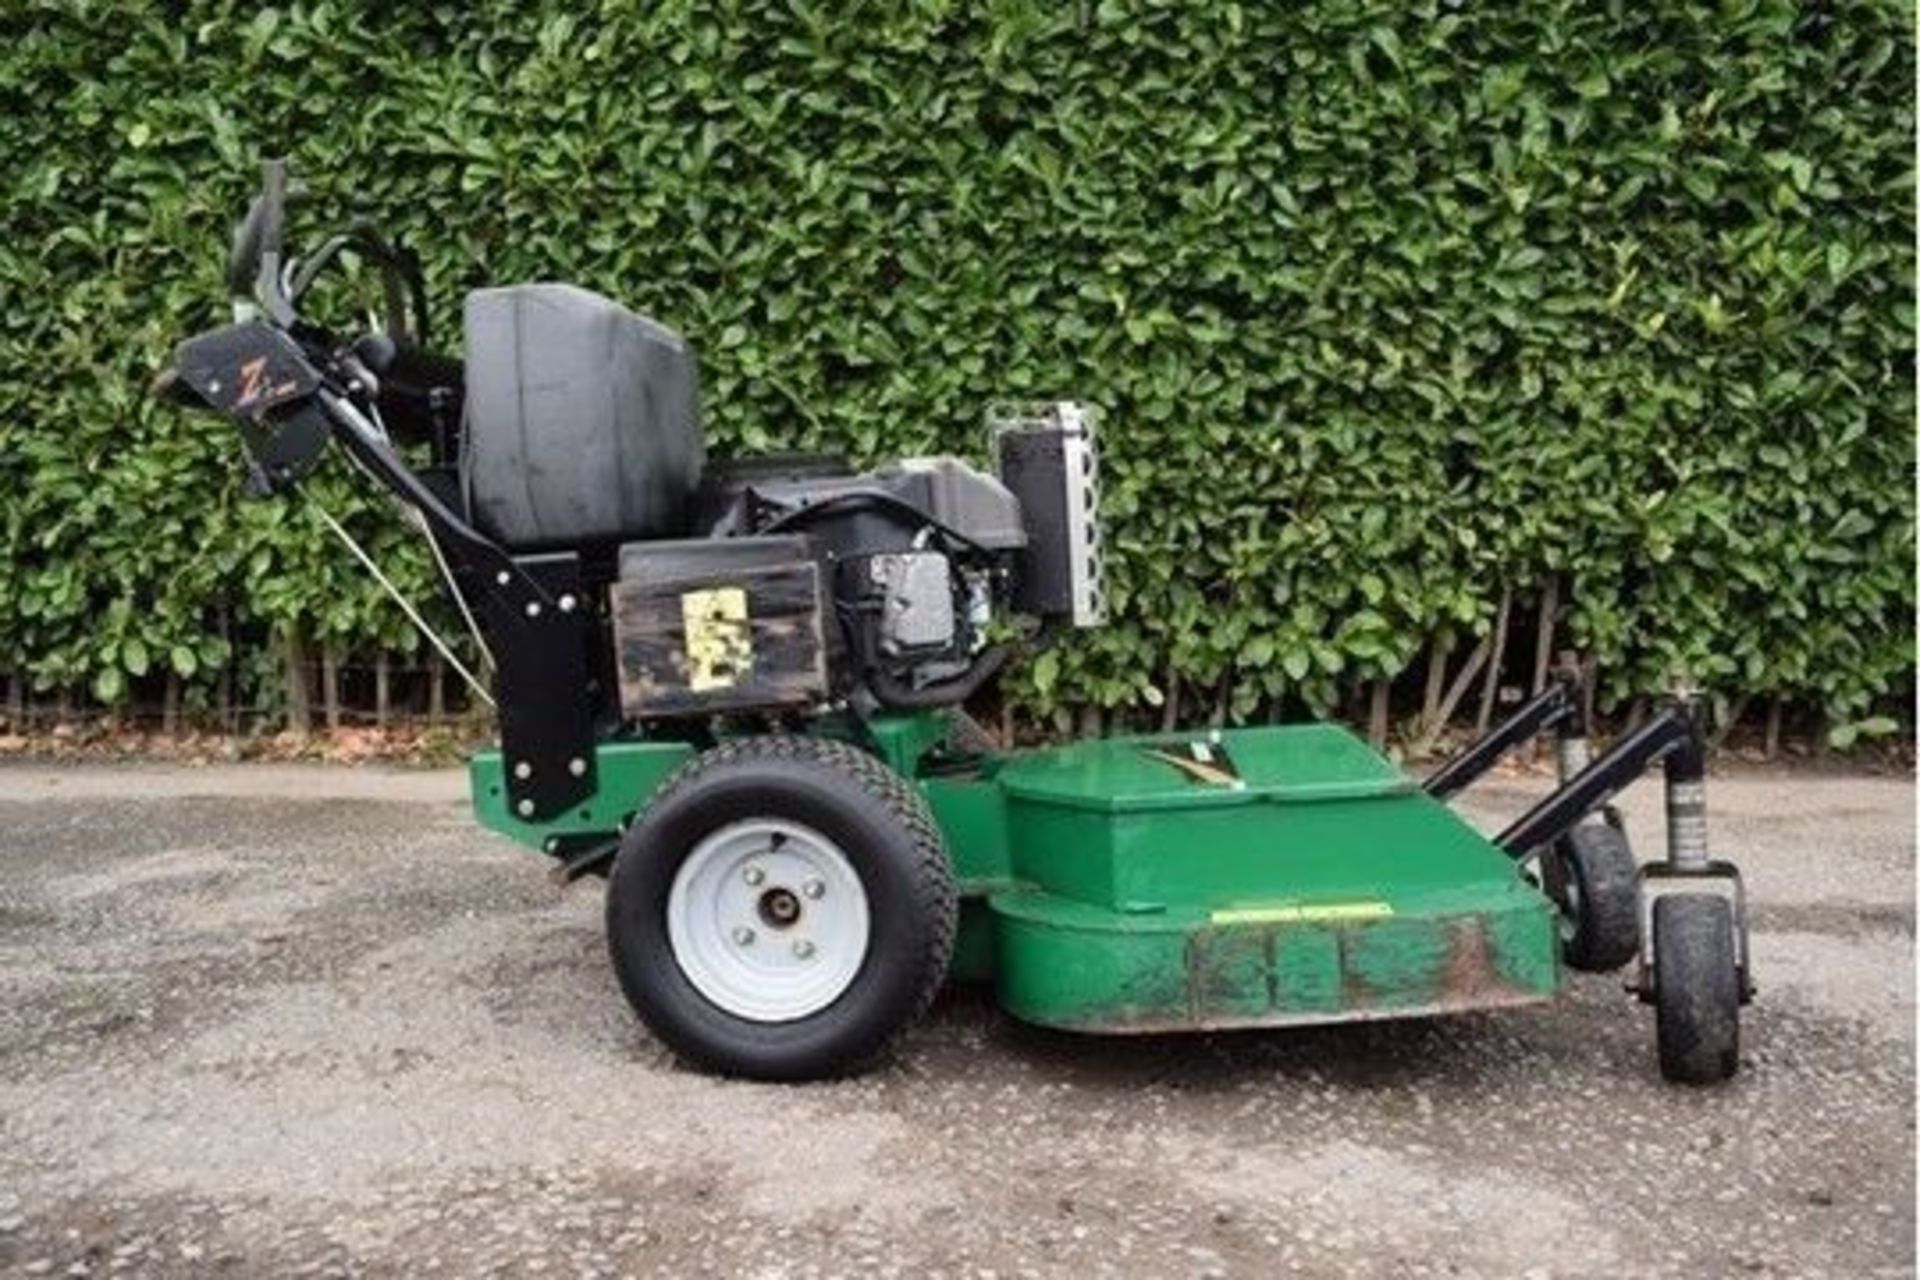 2011 Ransomes Pedestrian 36" Commercial Mower - Image 3 of 7